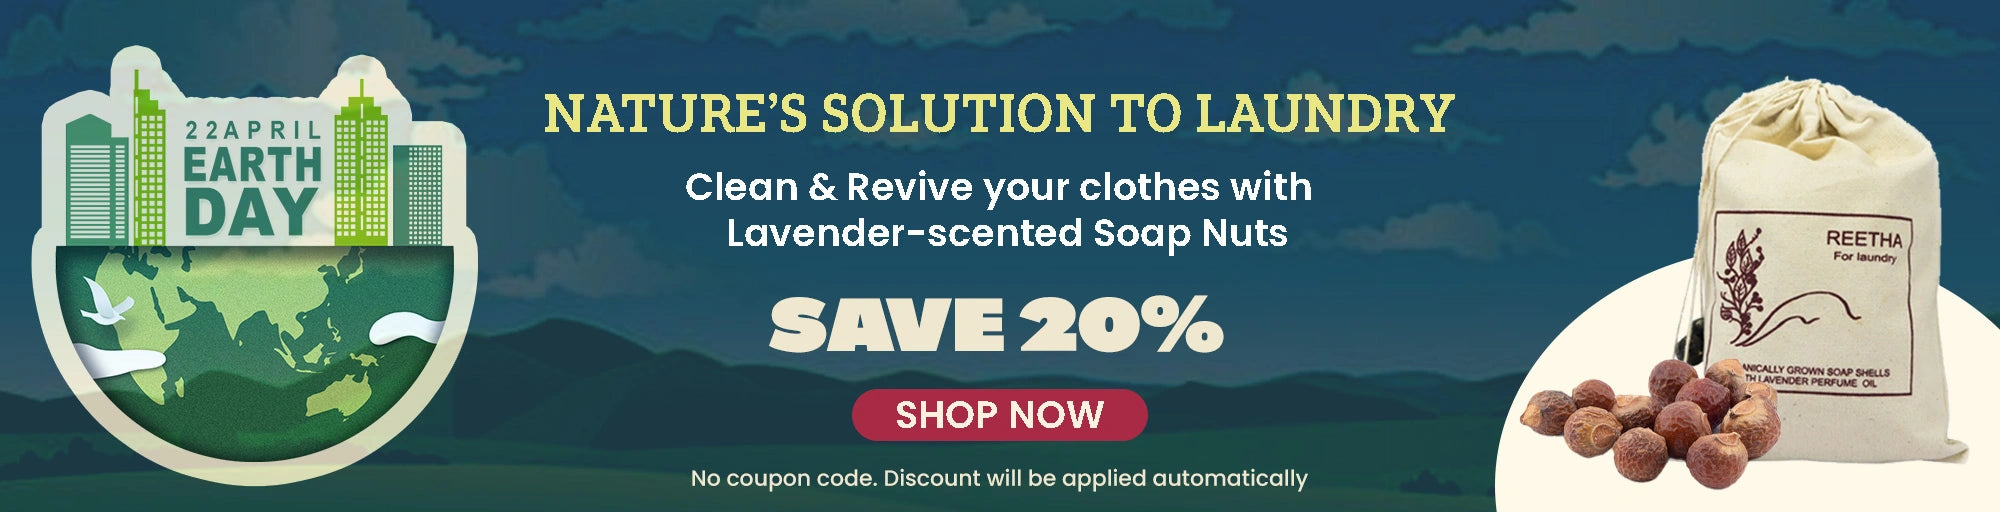 Save 20% to Revive Your Clothes With Lavender Scented Soapnuts